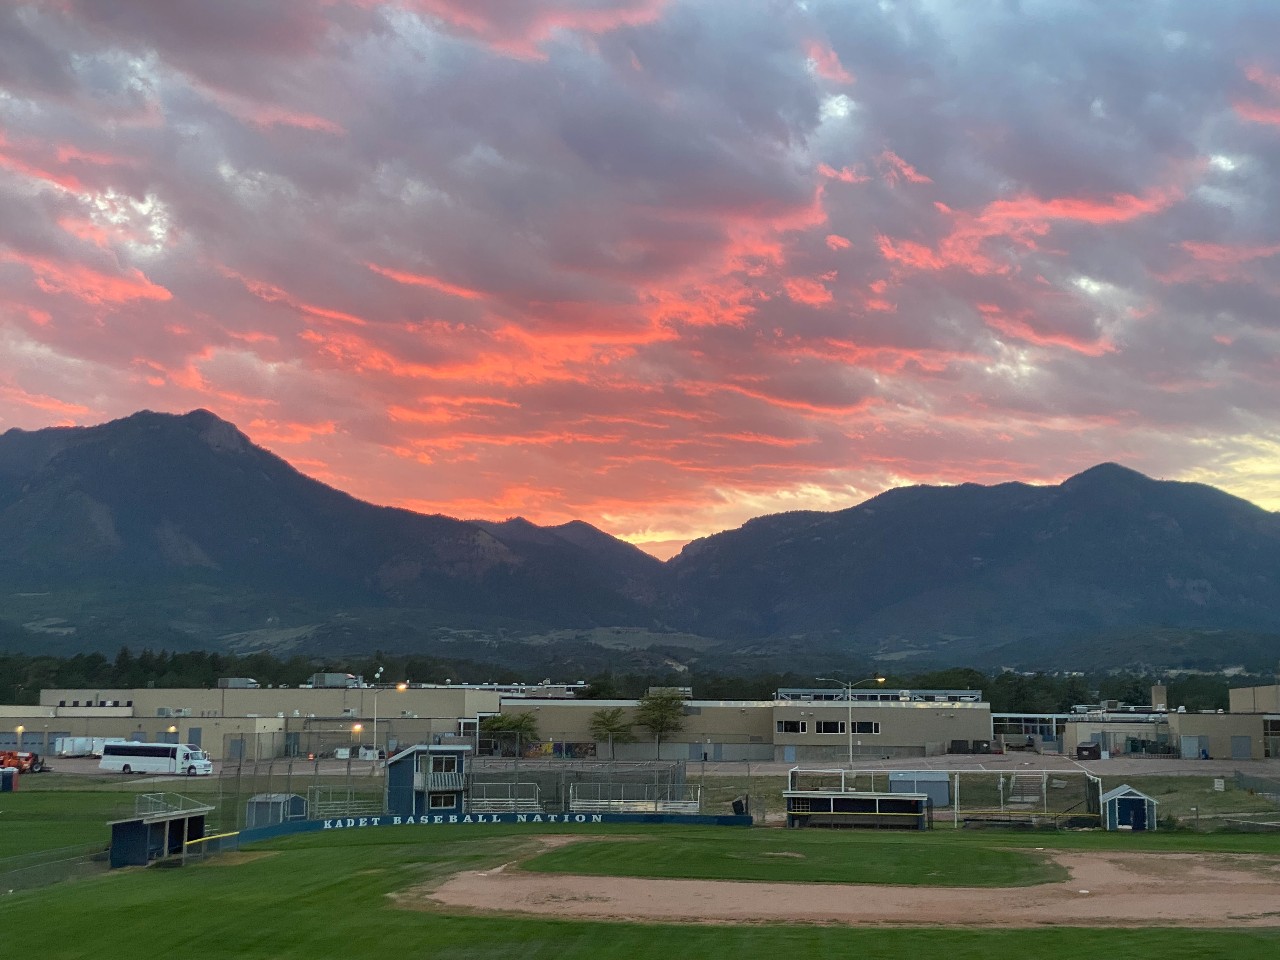 A view of the AAHS baseball field with a mountain sunset in the background.